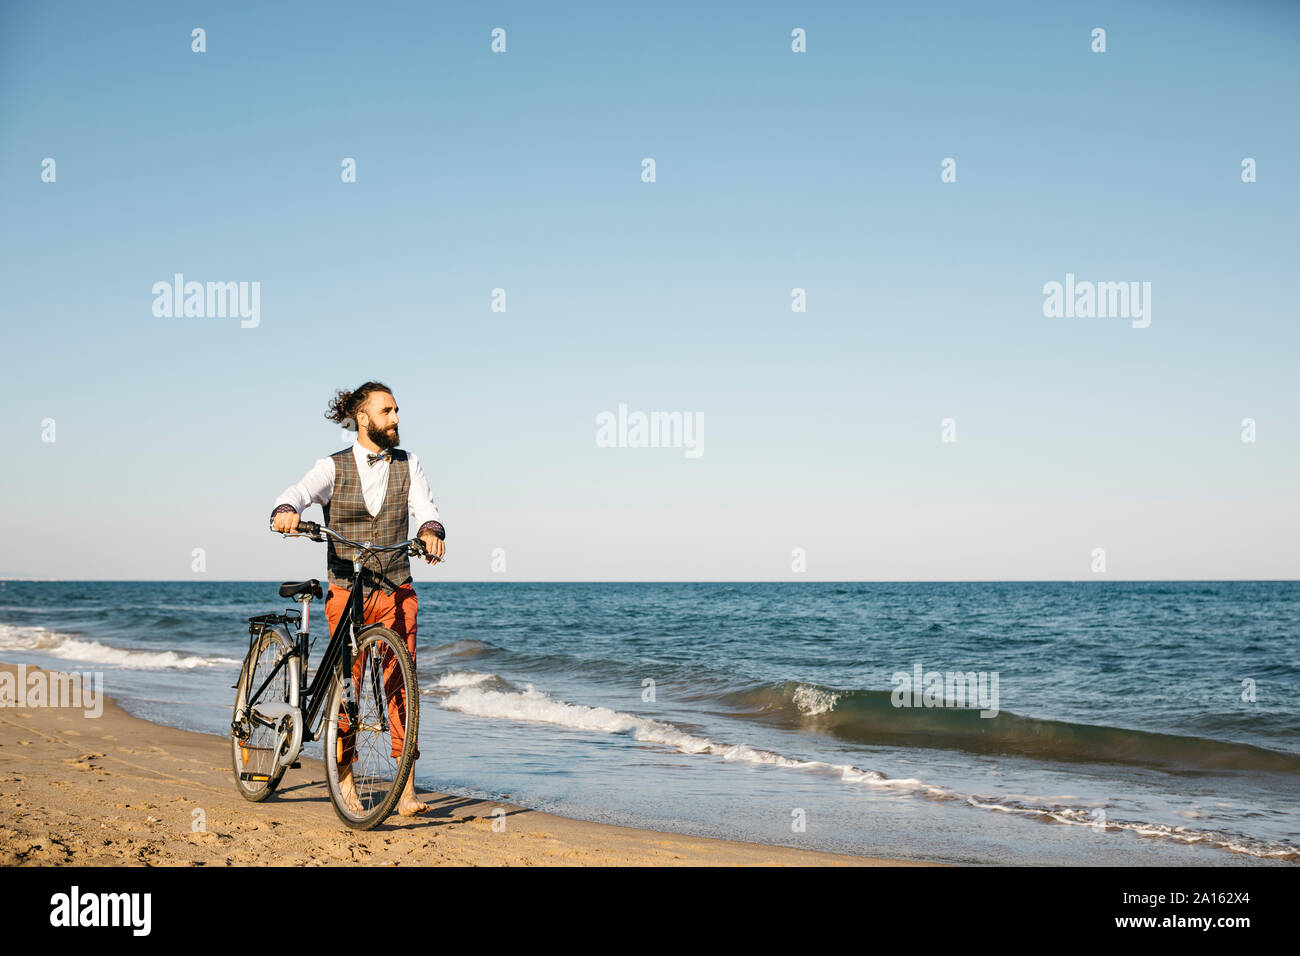 Well dressed man walking with his bike on a beach Stock Photo